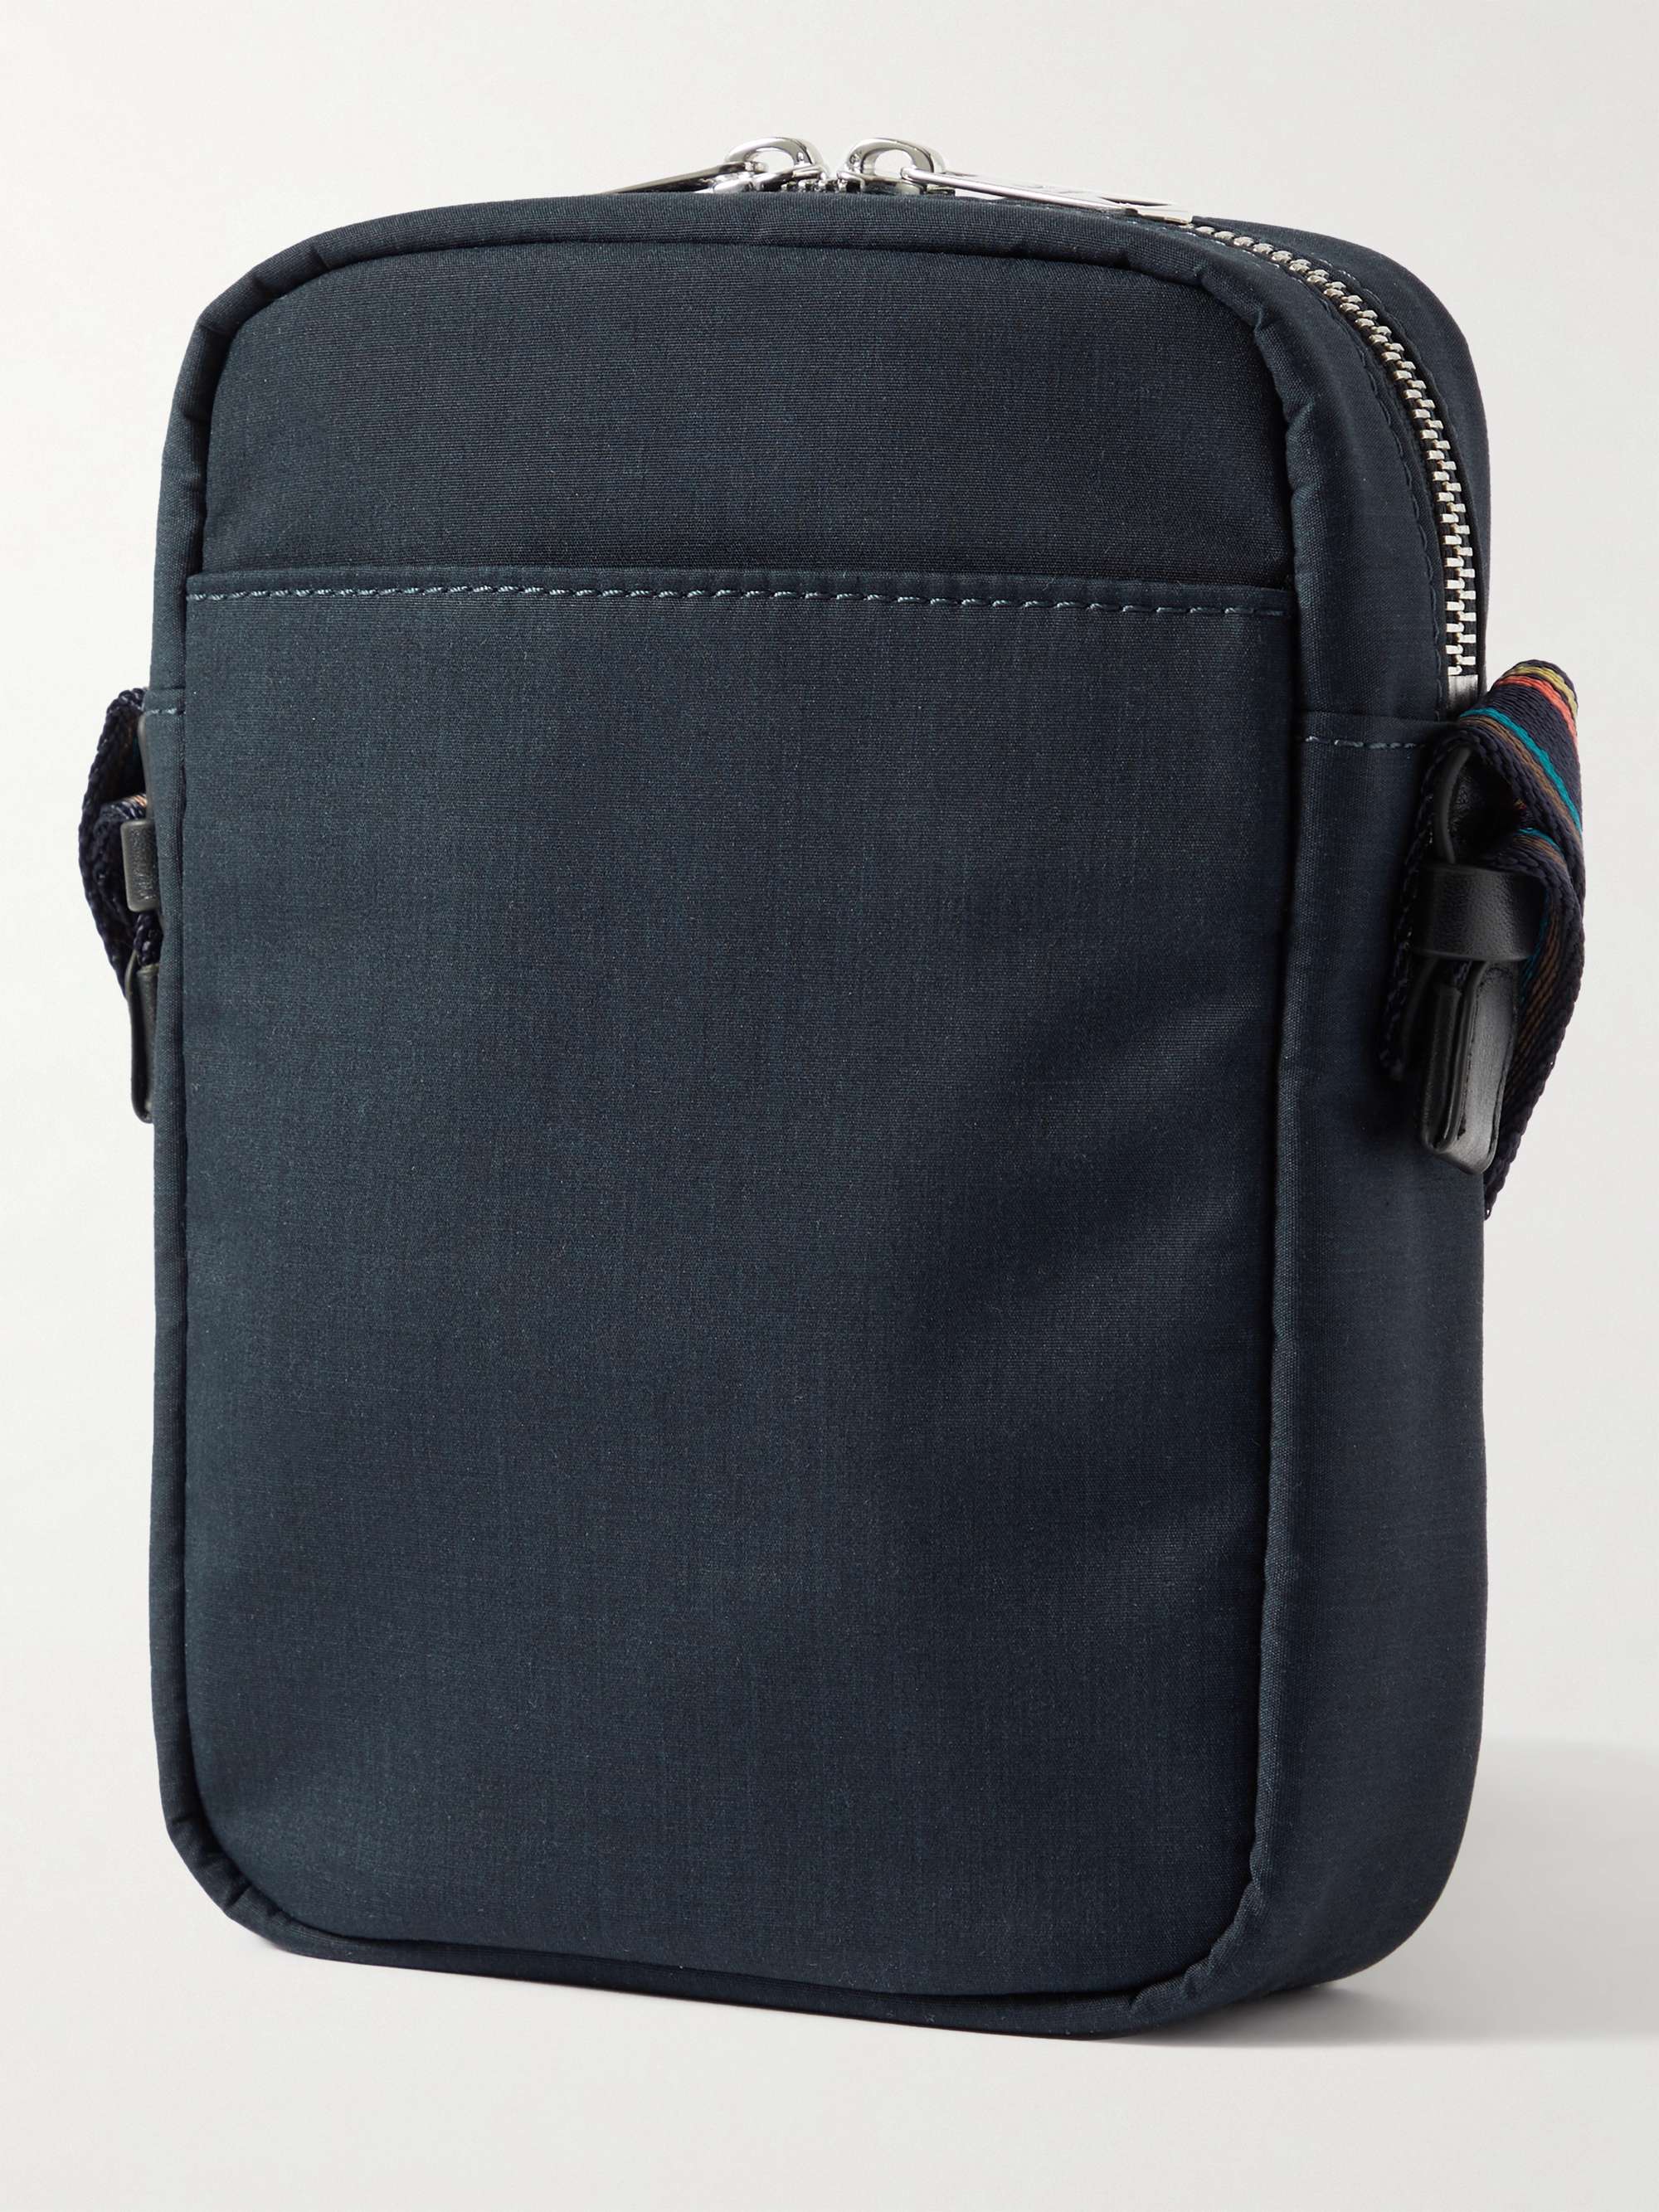 PAUL SMITH Flight Leather and Mesh-Trimmed Canvas Messenger Bag